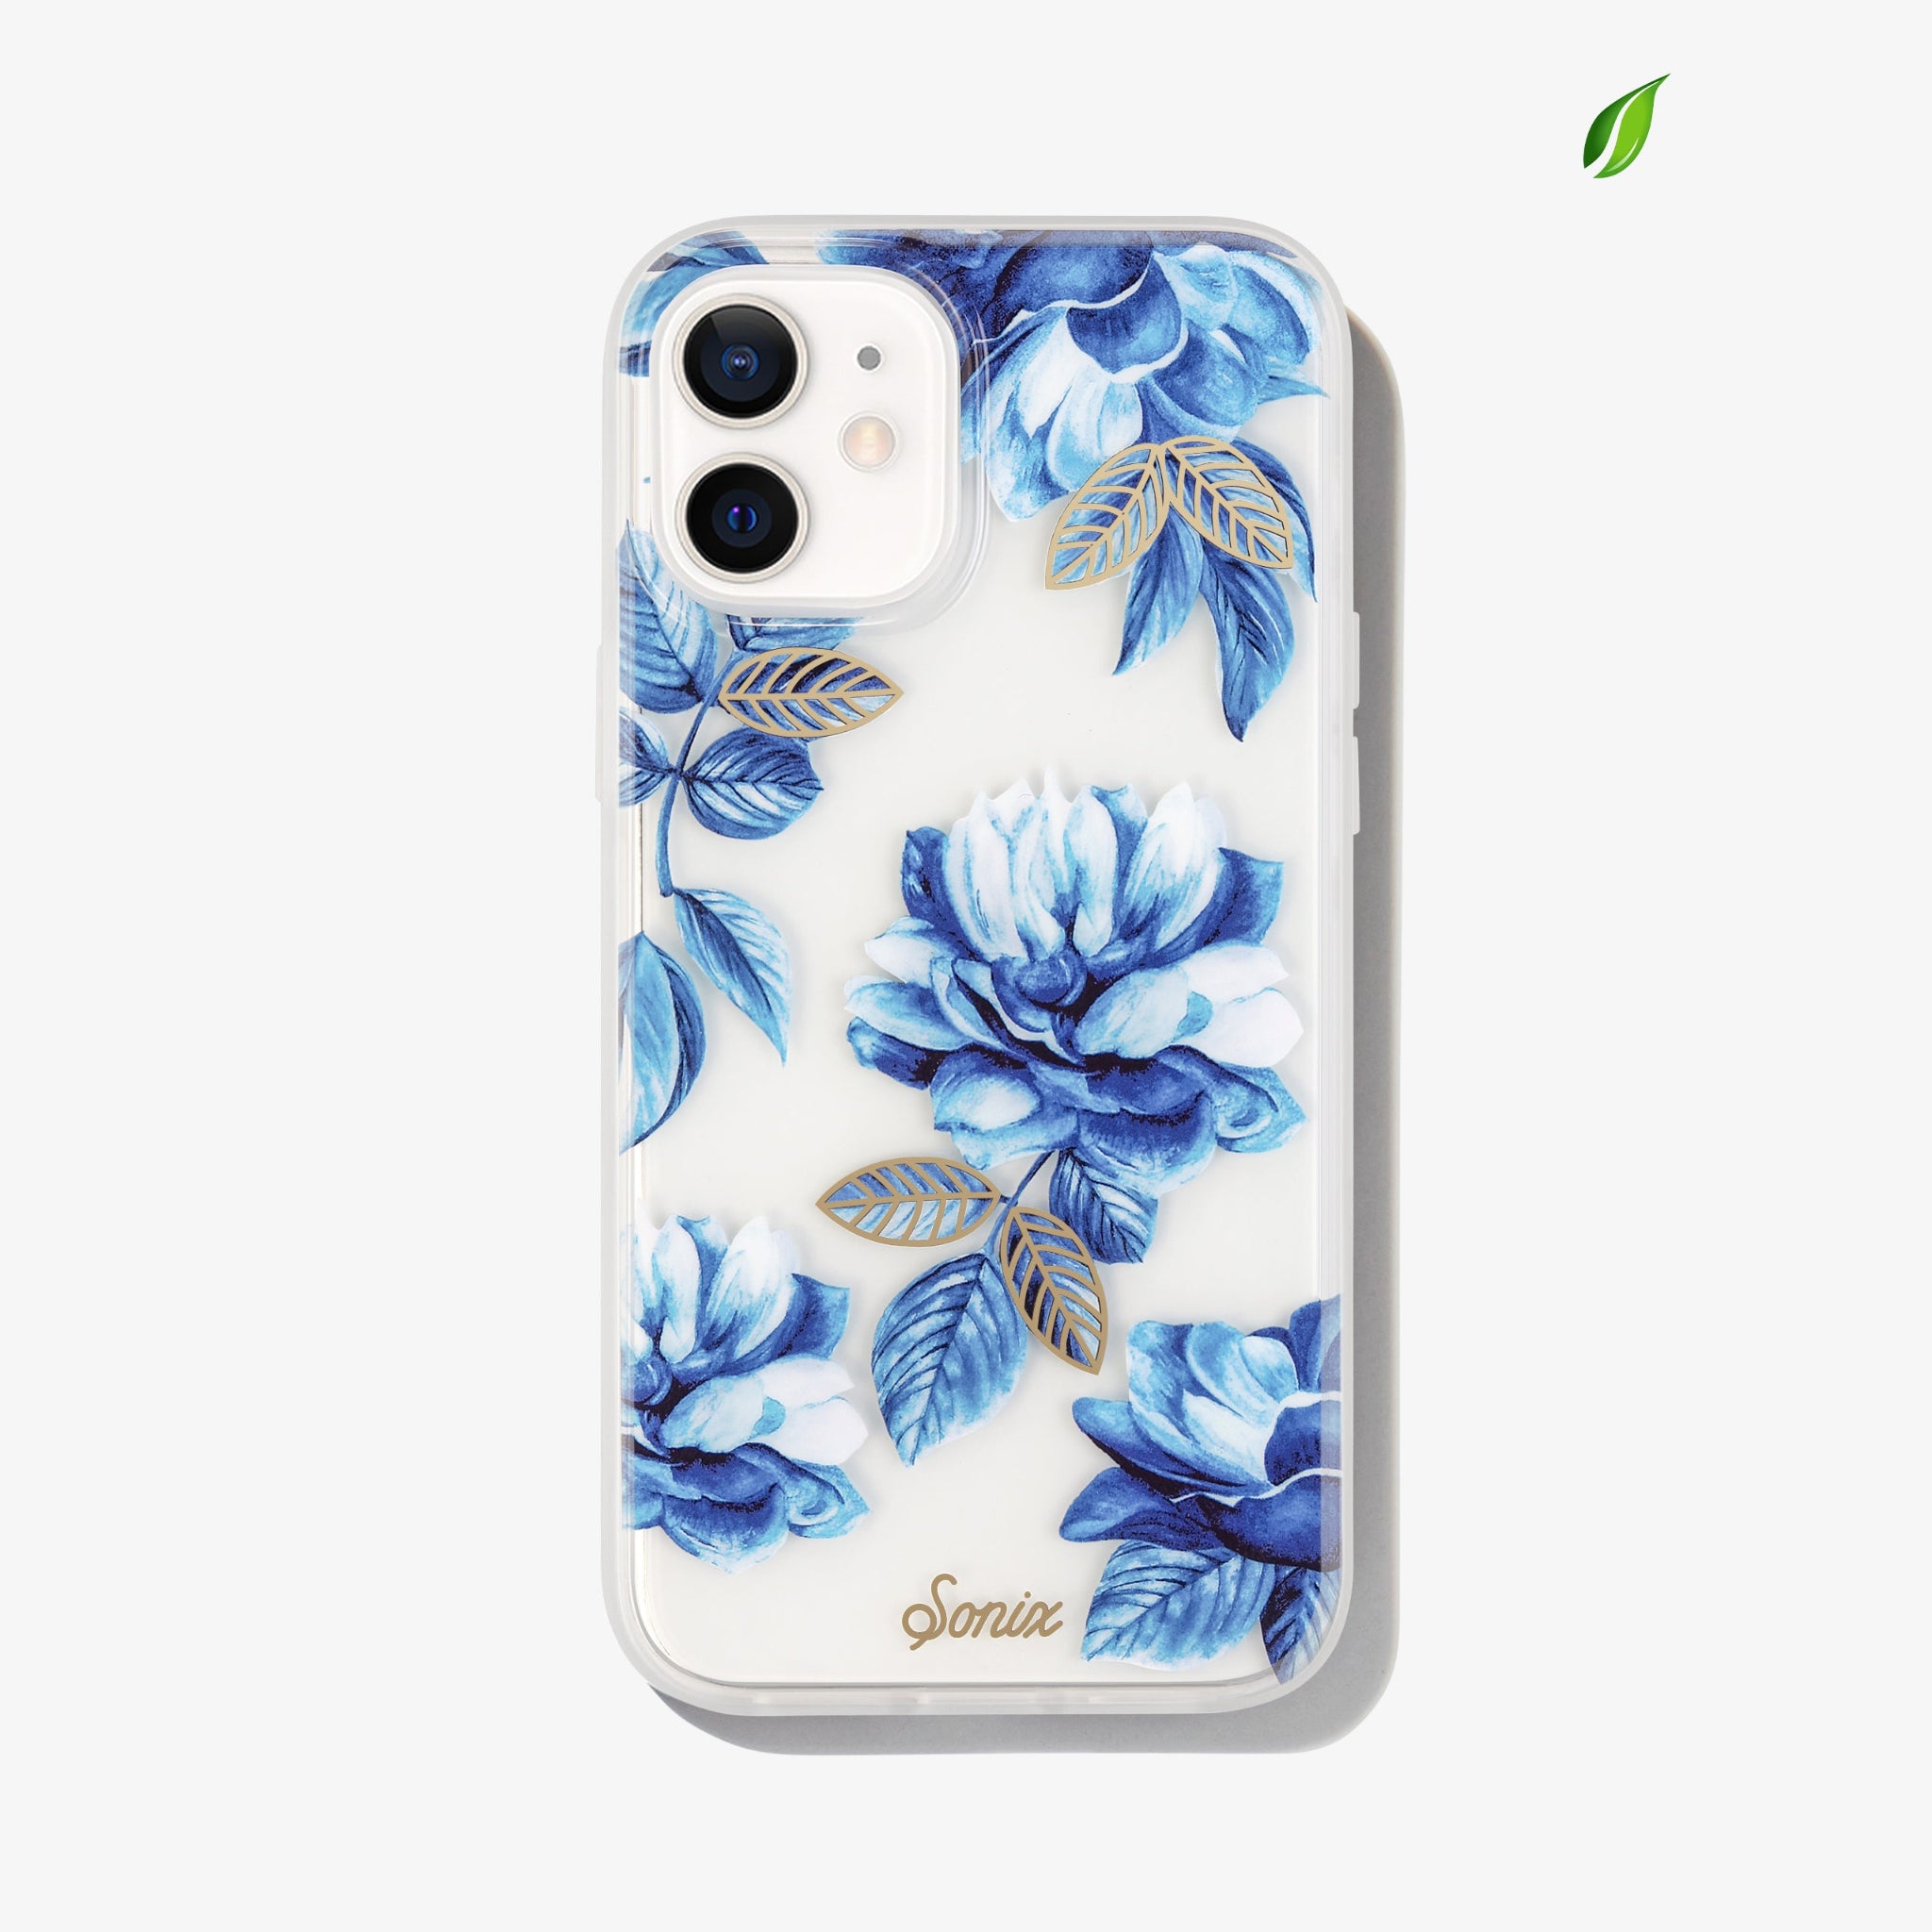 deep blue floral design with gold embroidered leaves shown on an iphone 12